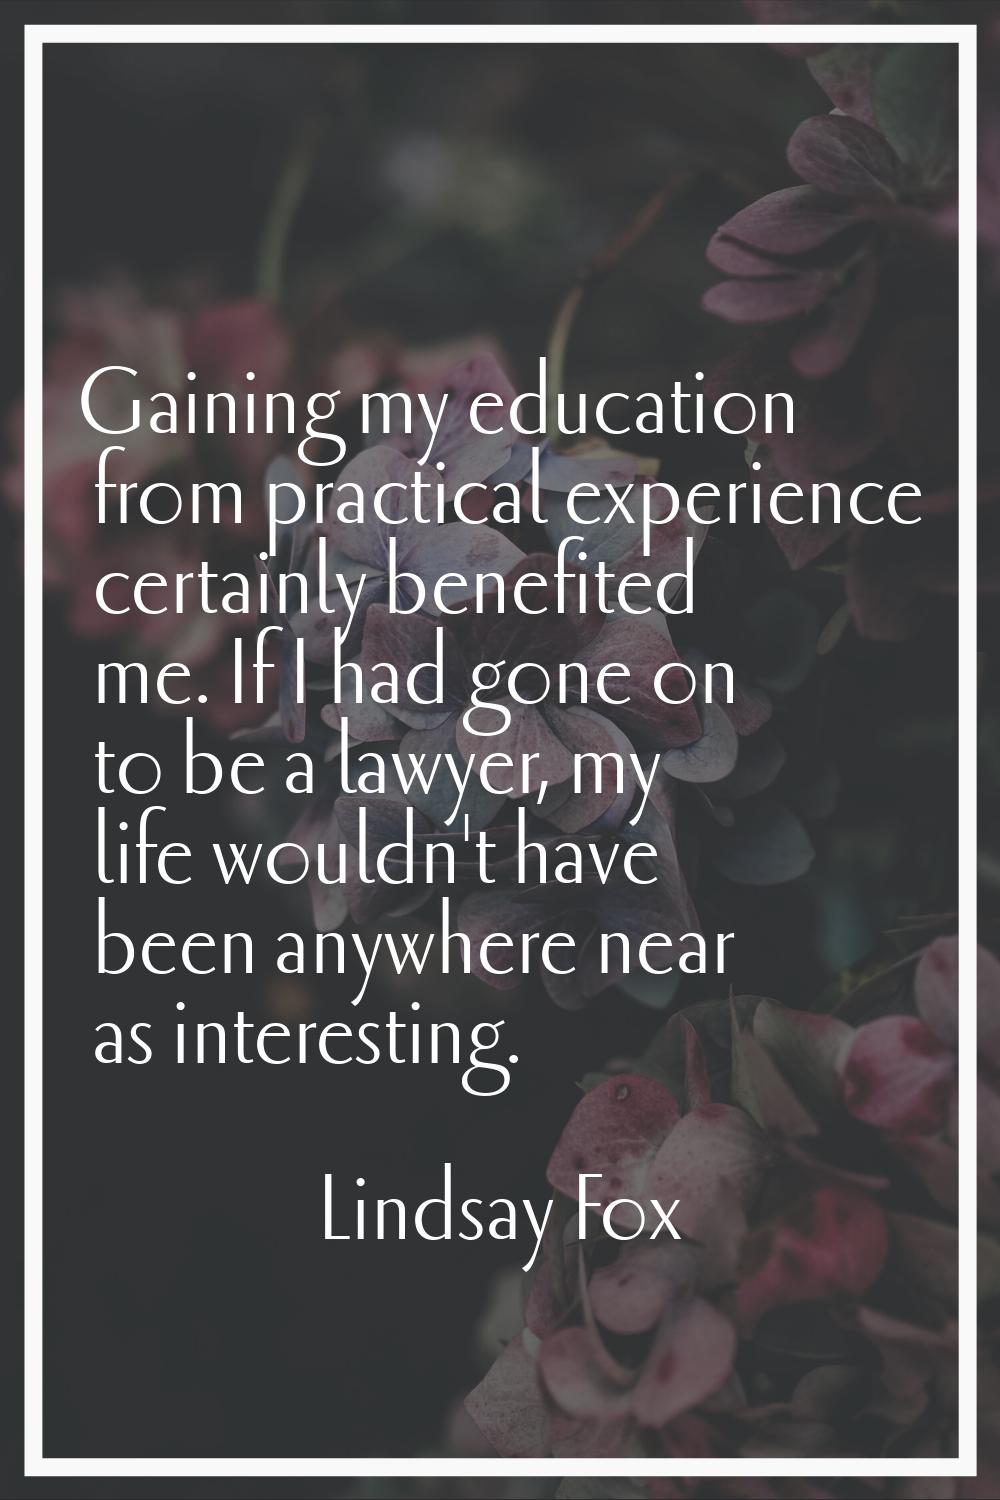 Gaining my education from practical experience certainly benefited me. If I had gone on to be a law